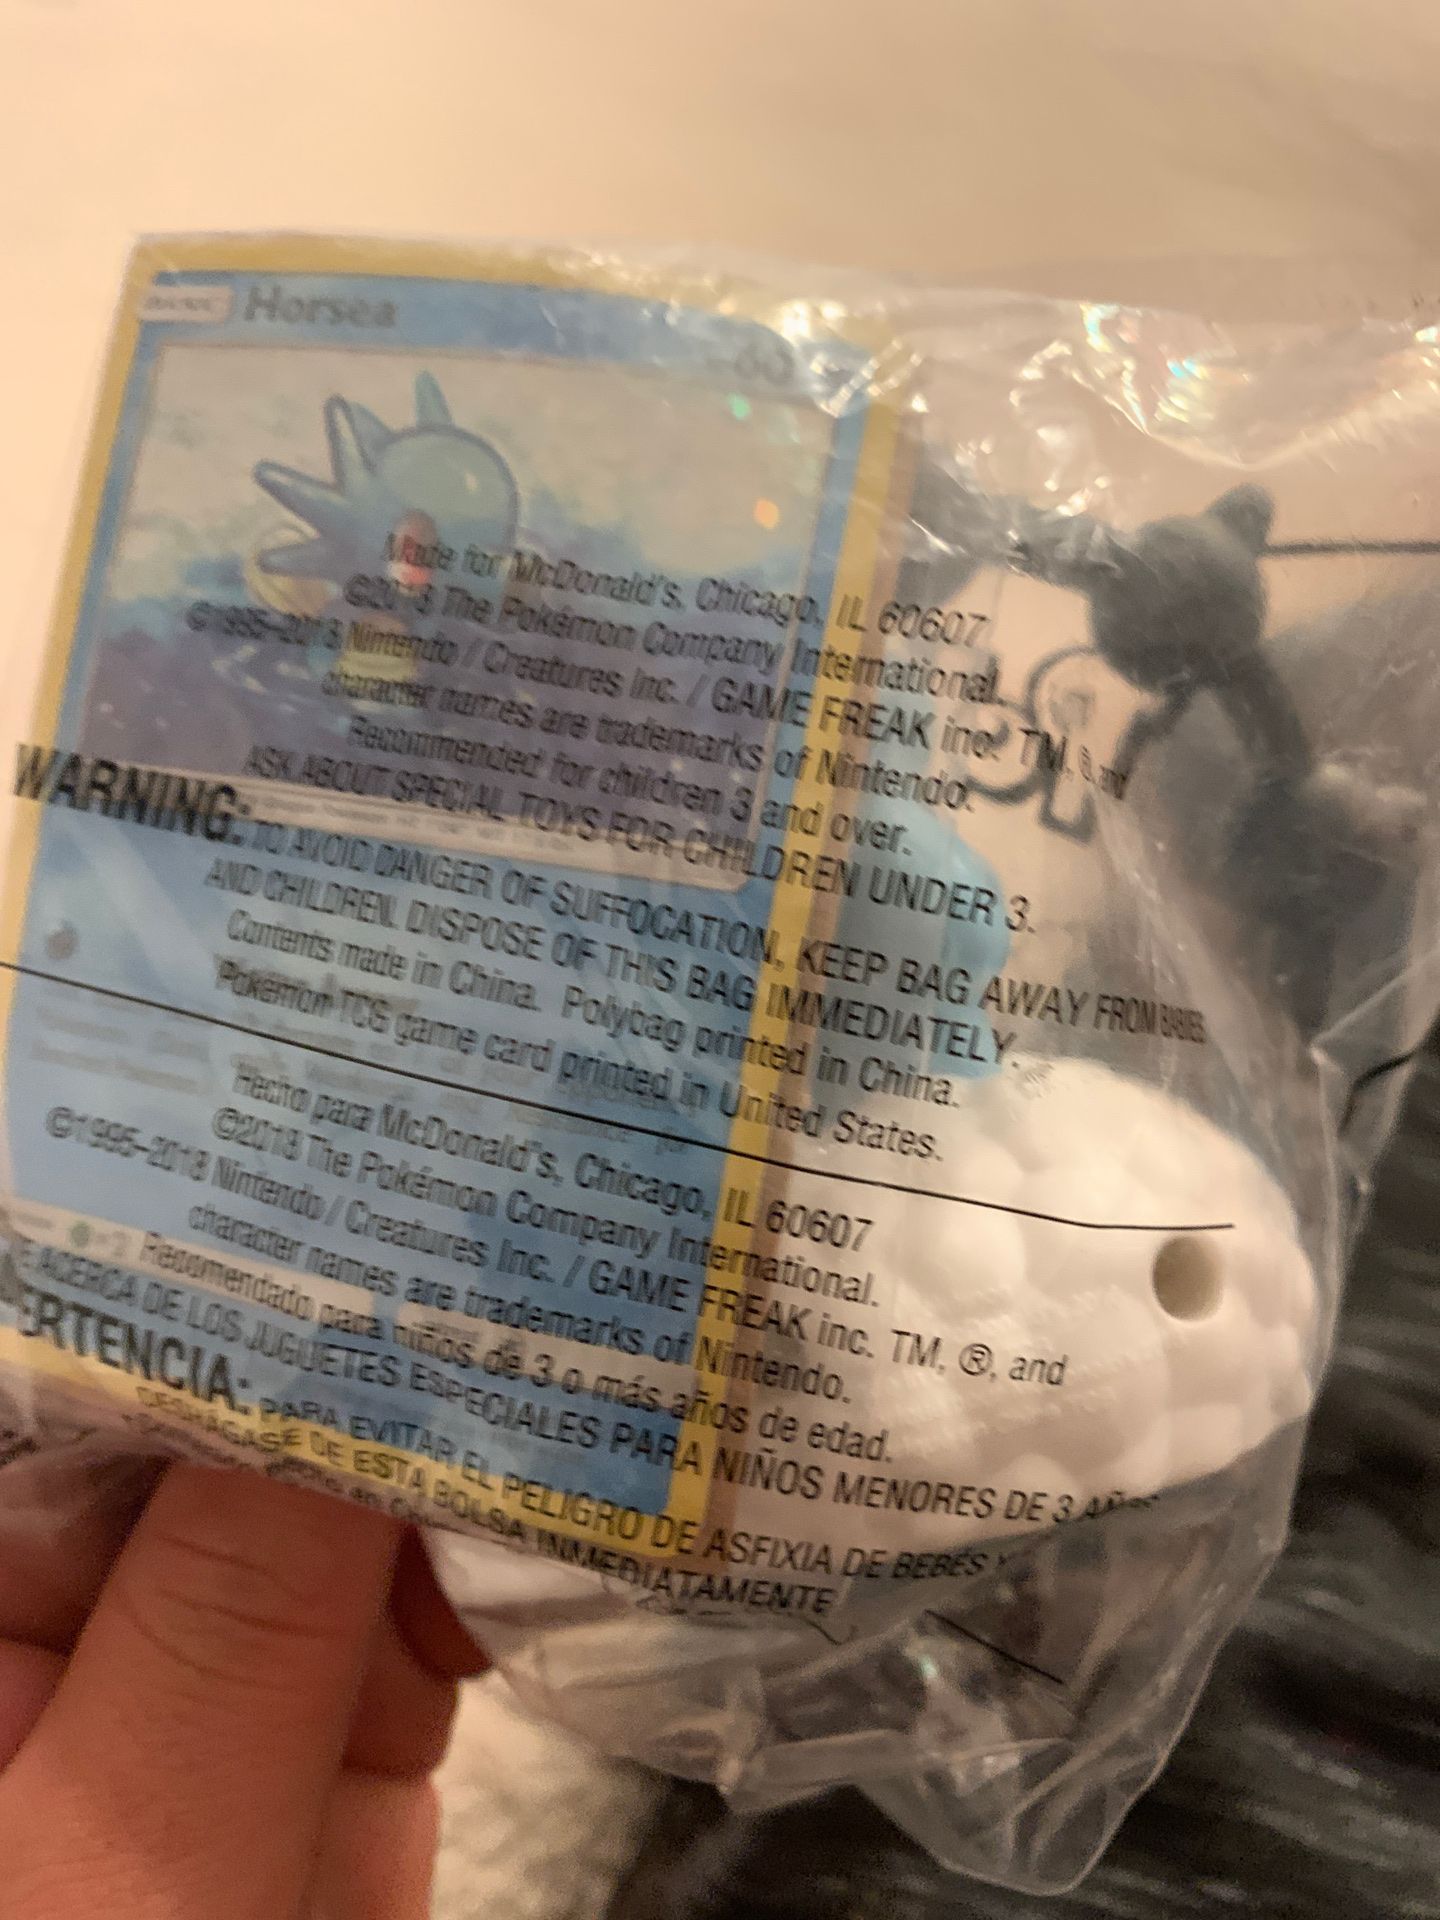 Brand new Pokémon toy & collection card of figure